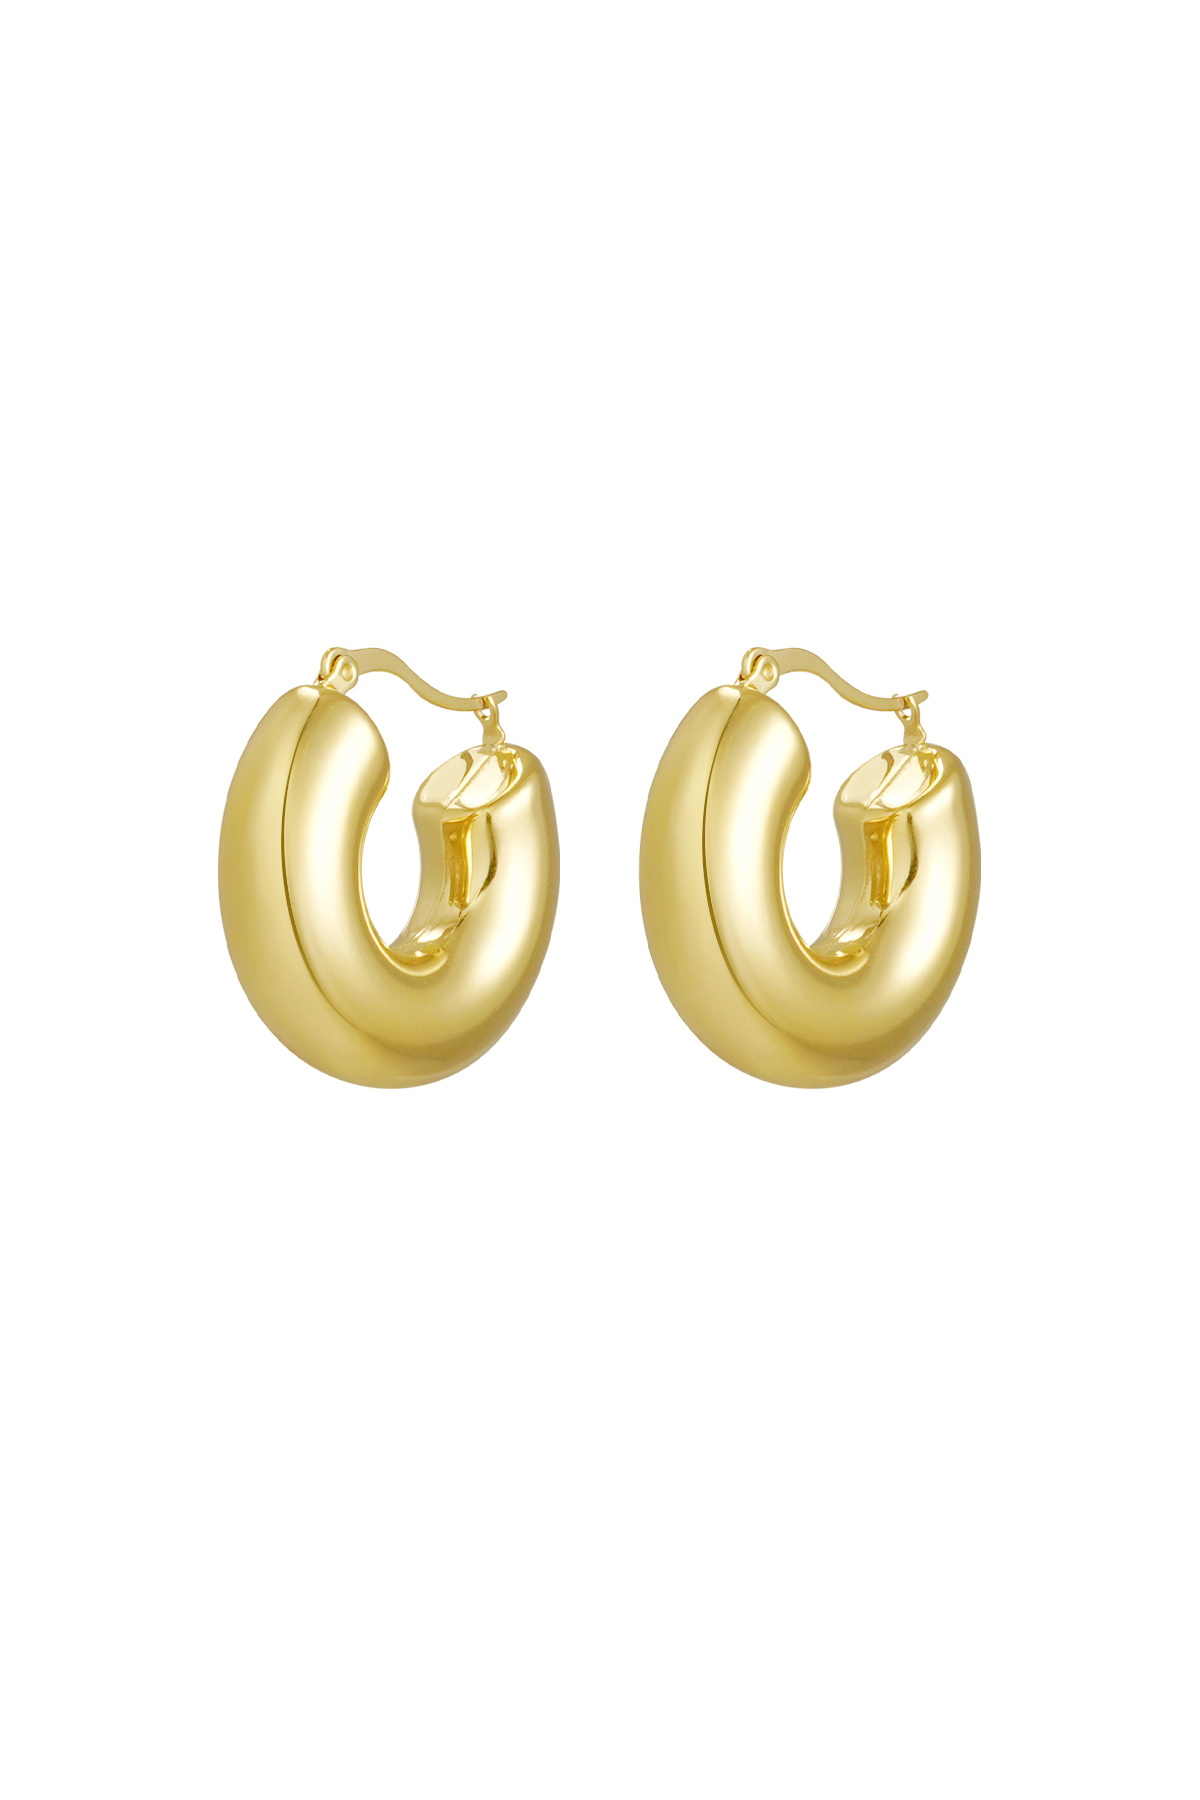 Earrings round thick - gold 